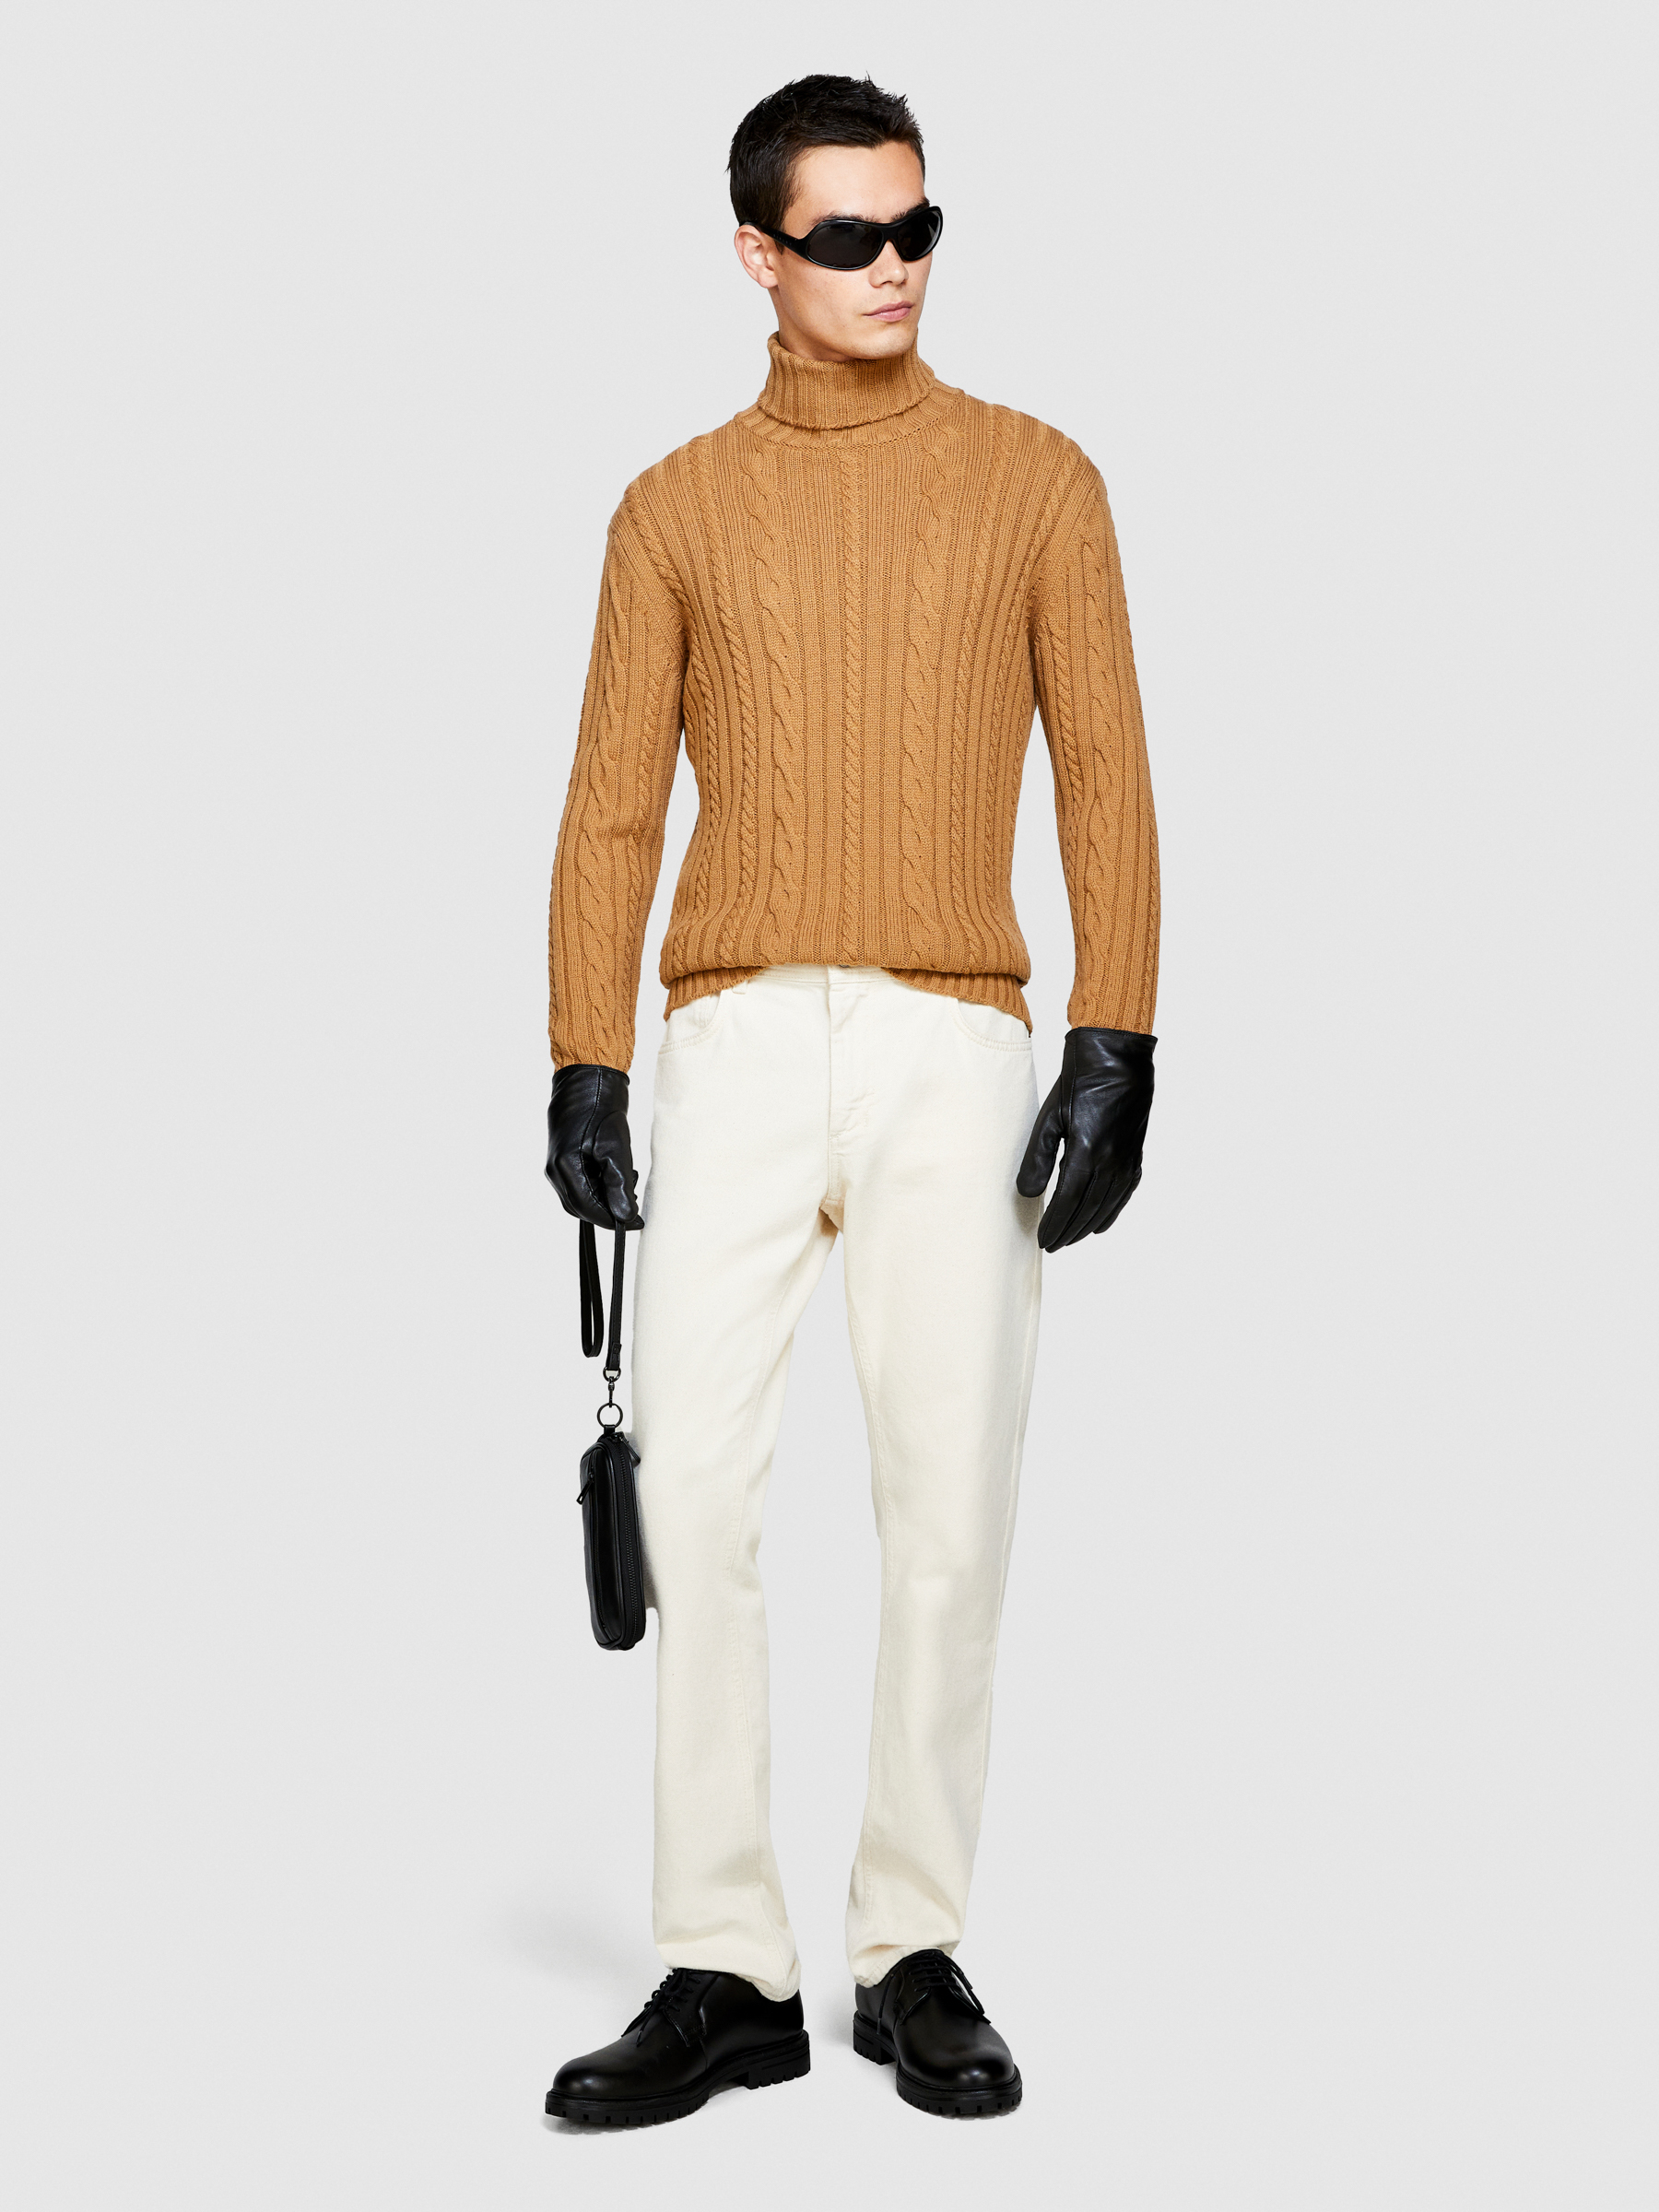 Sisley - Ribbed Cable Knit Sweater, Man, Camel, Size: EL